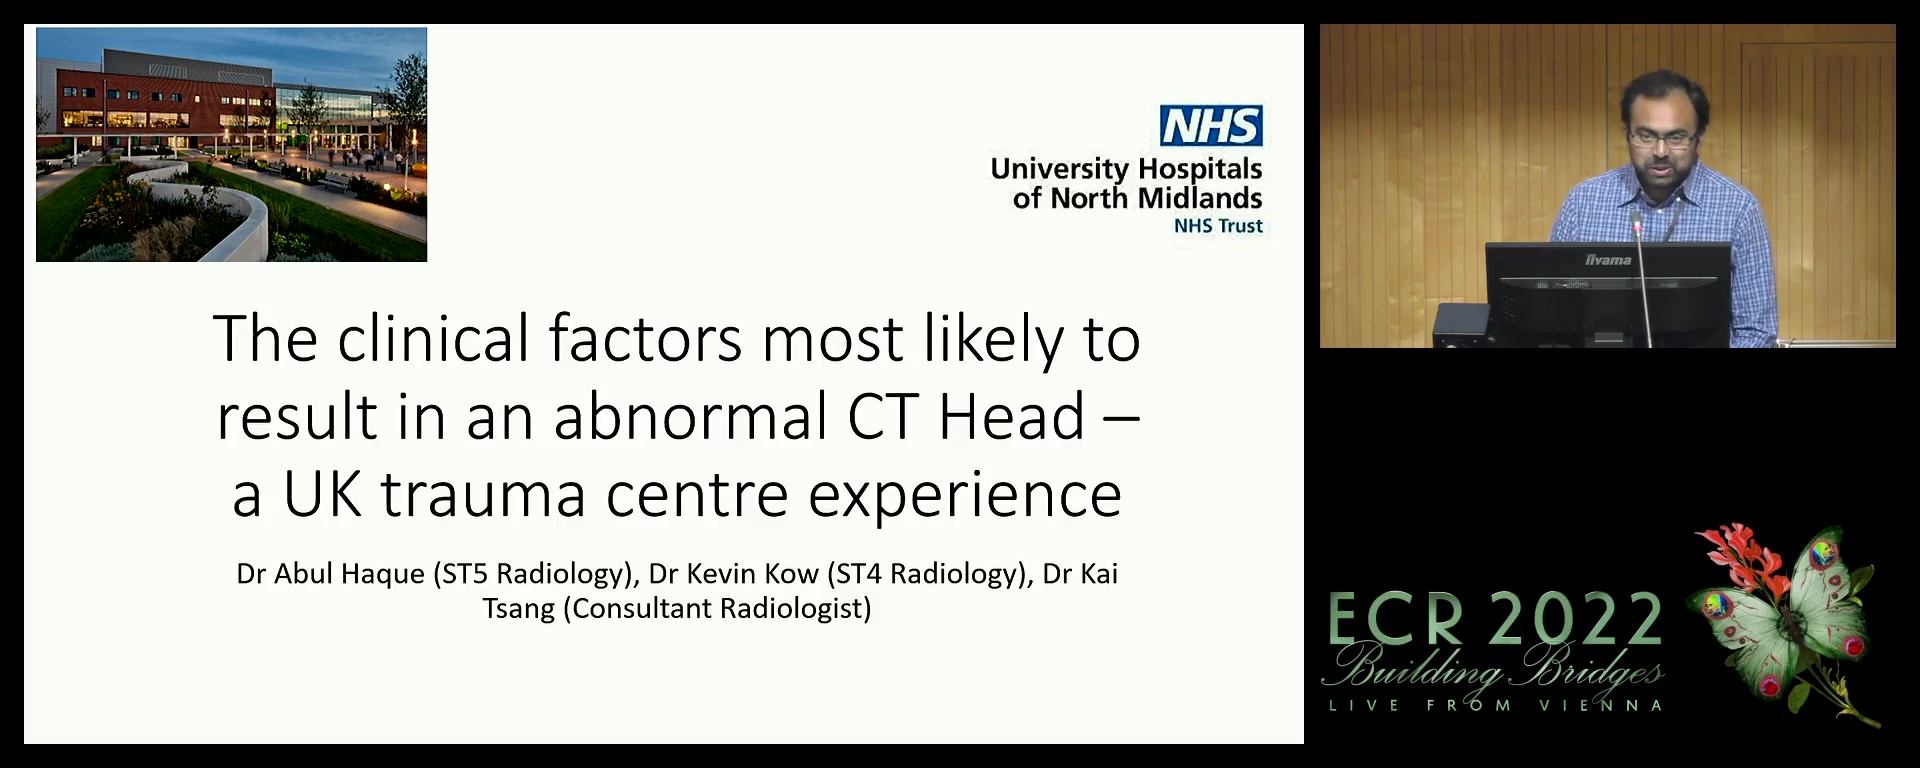 The clinical factors most likely to result in an abnormal CT head – a UK trauma centre experience - Abul Haque, Stoke-On-Trent / UK